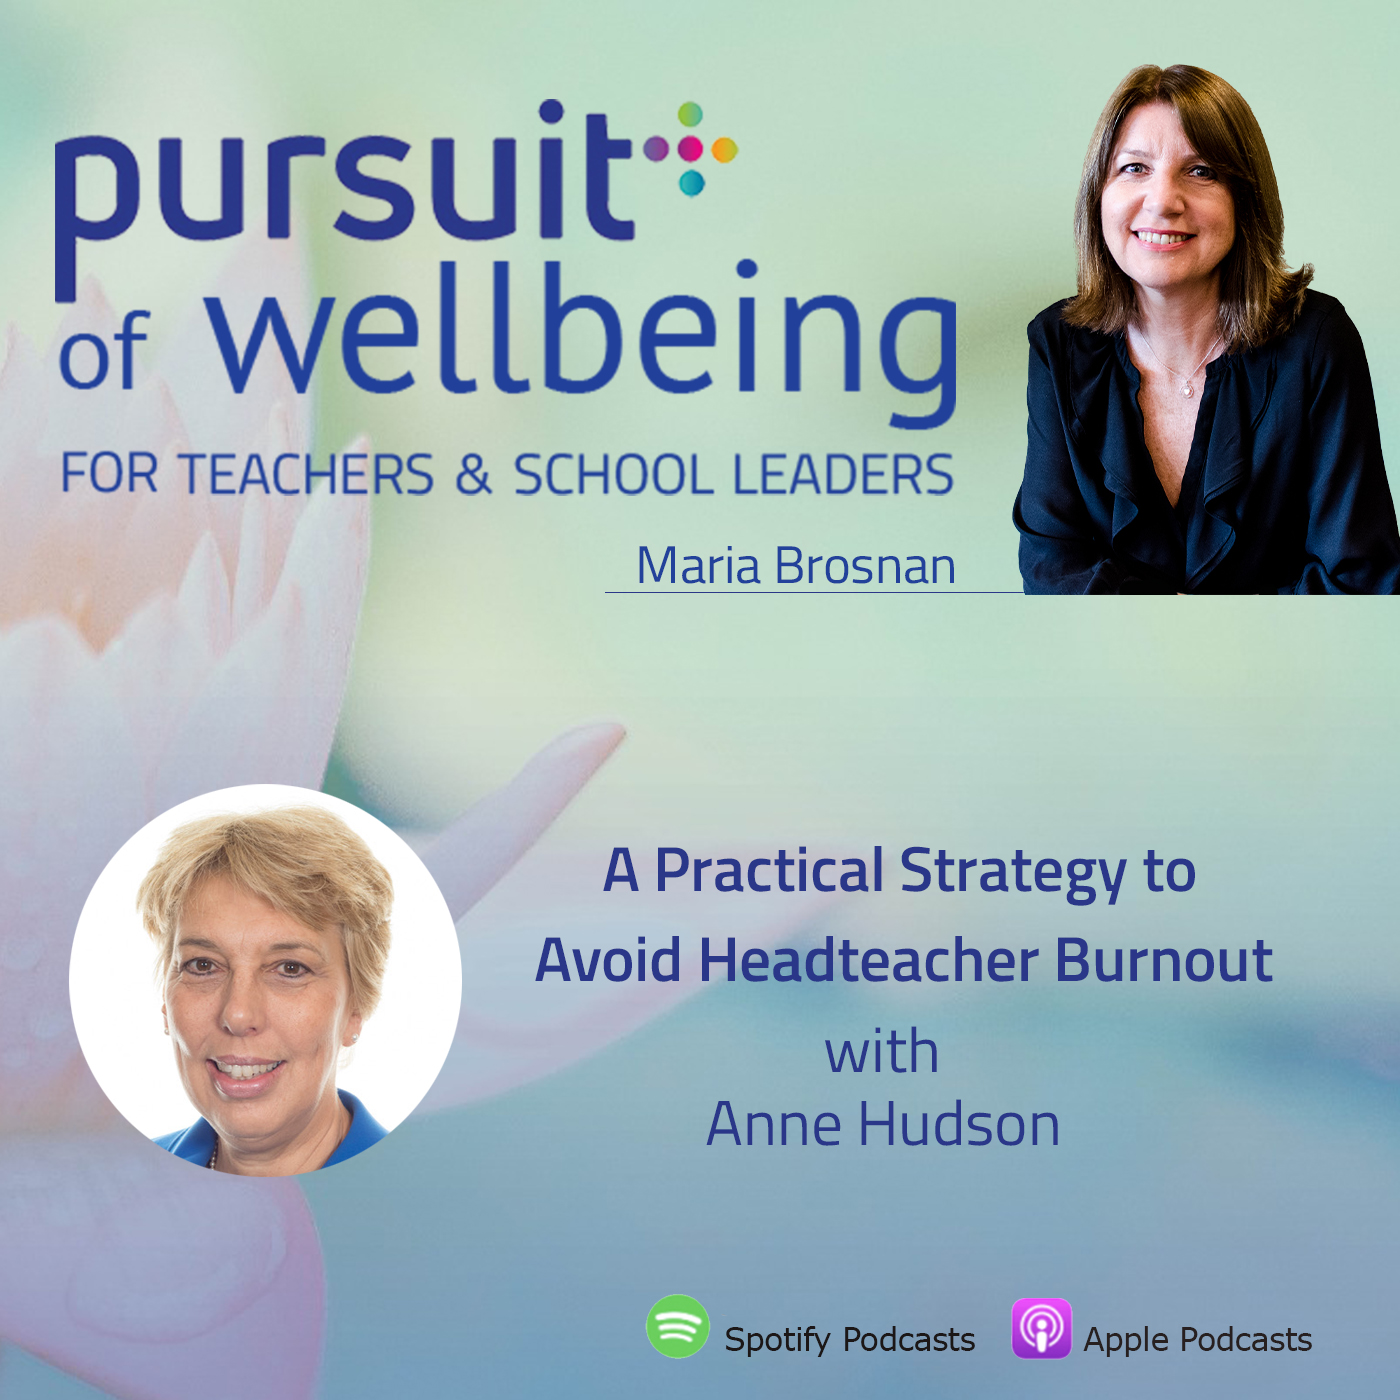 A Practical Strategy to Avoid Headteacher Burnout with Anne Hudson